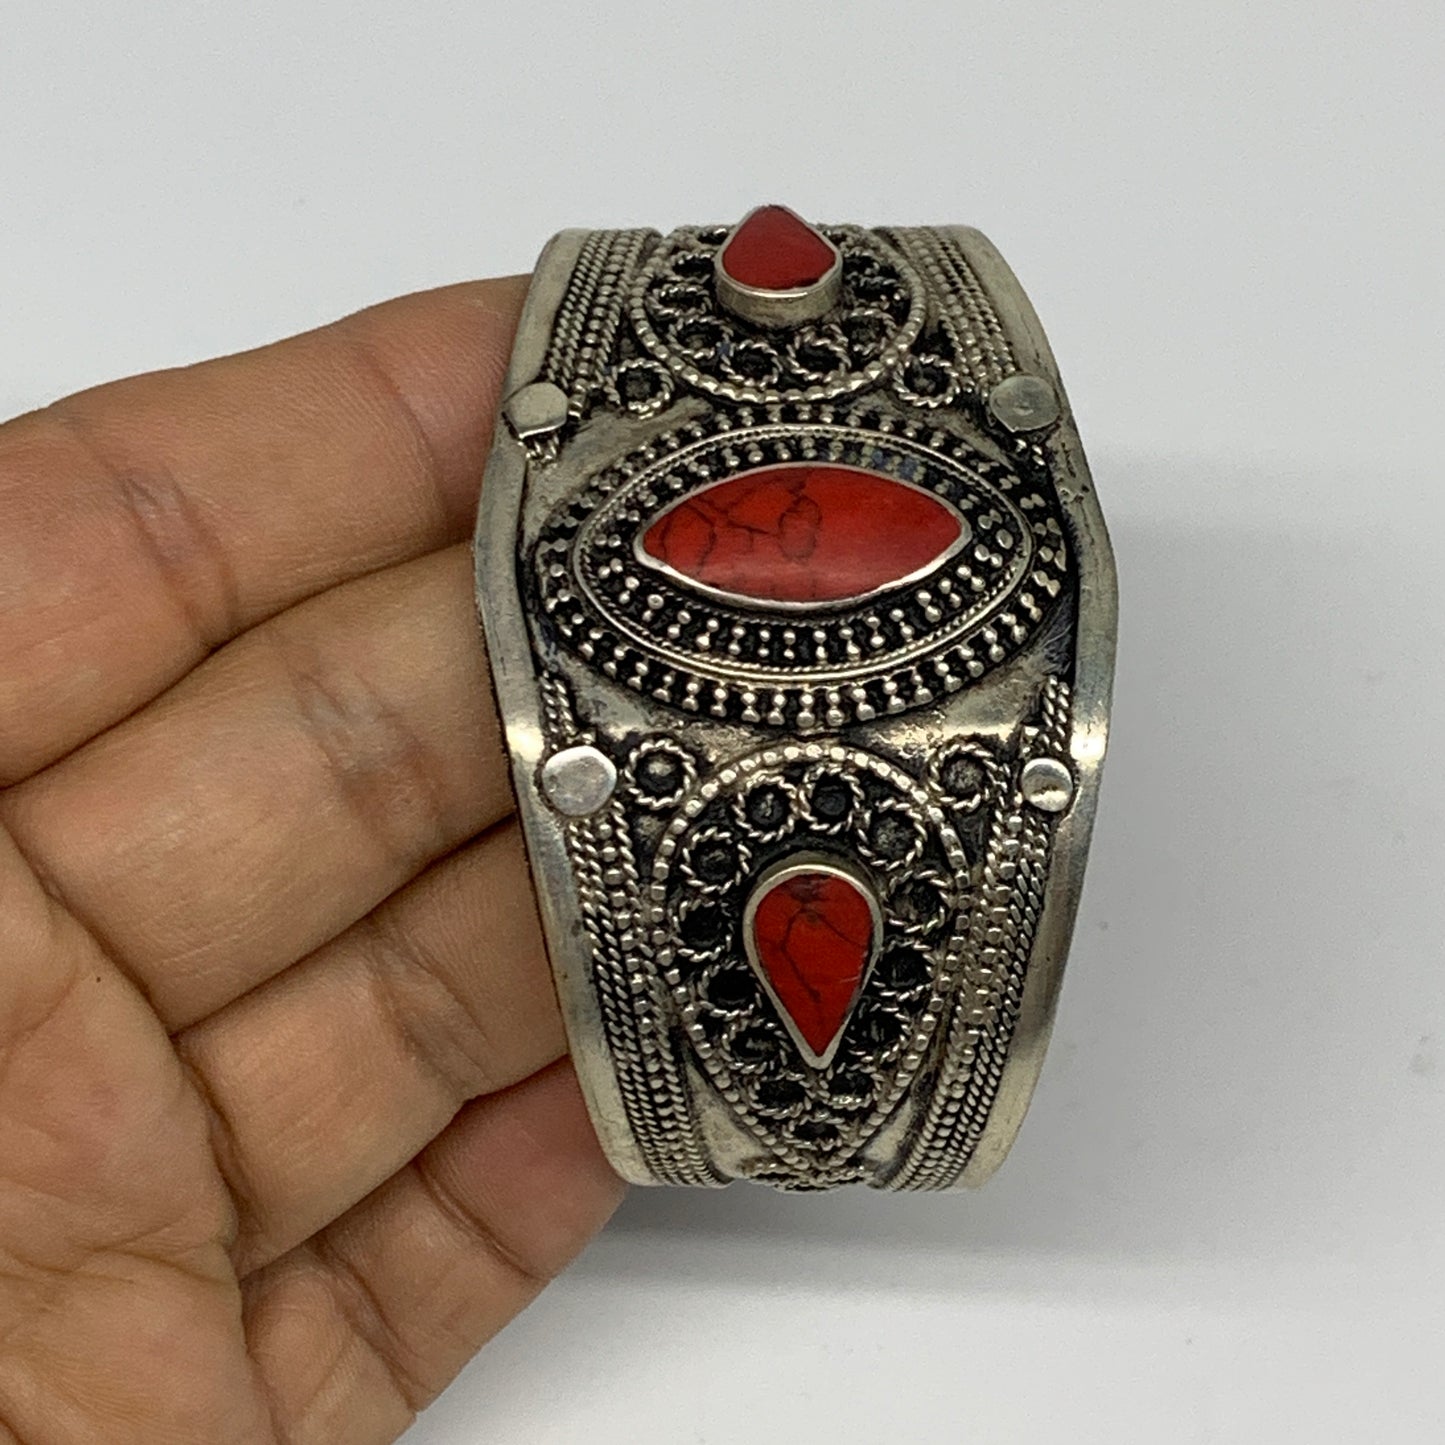 34.6g, 1.6" Turkmen Cuff Bracelet Tribal Small Marquise, Red Coral Inlay, B13499